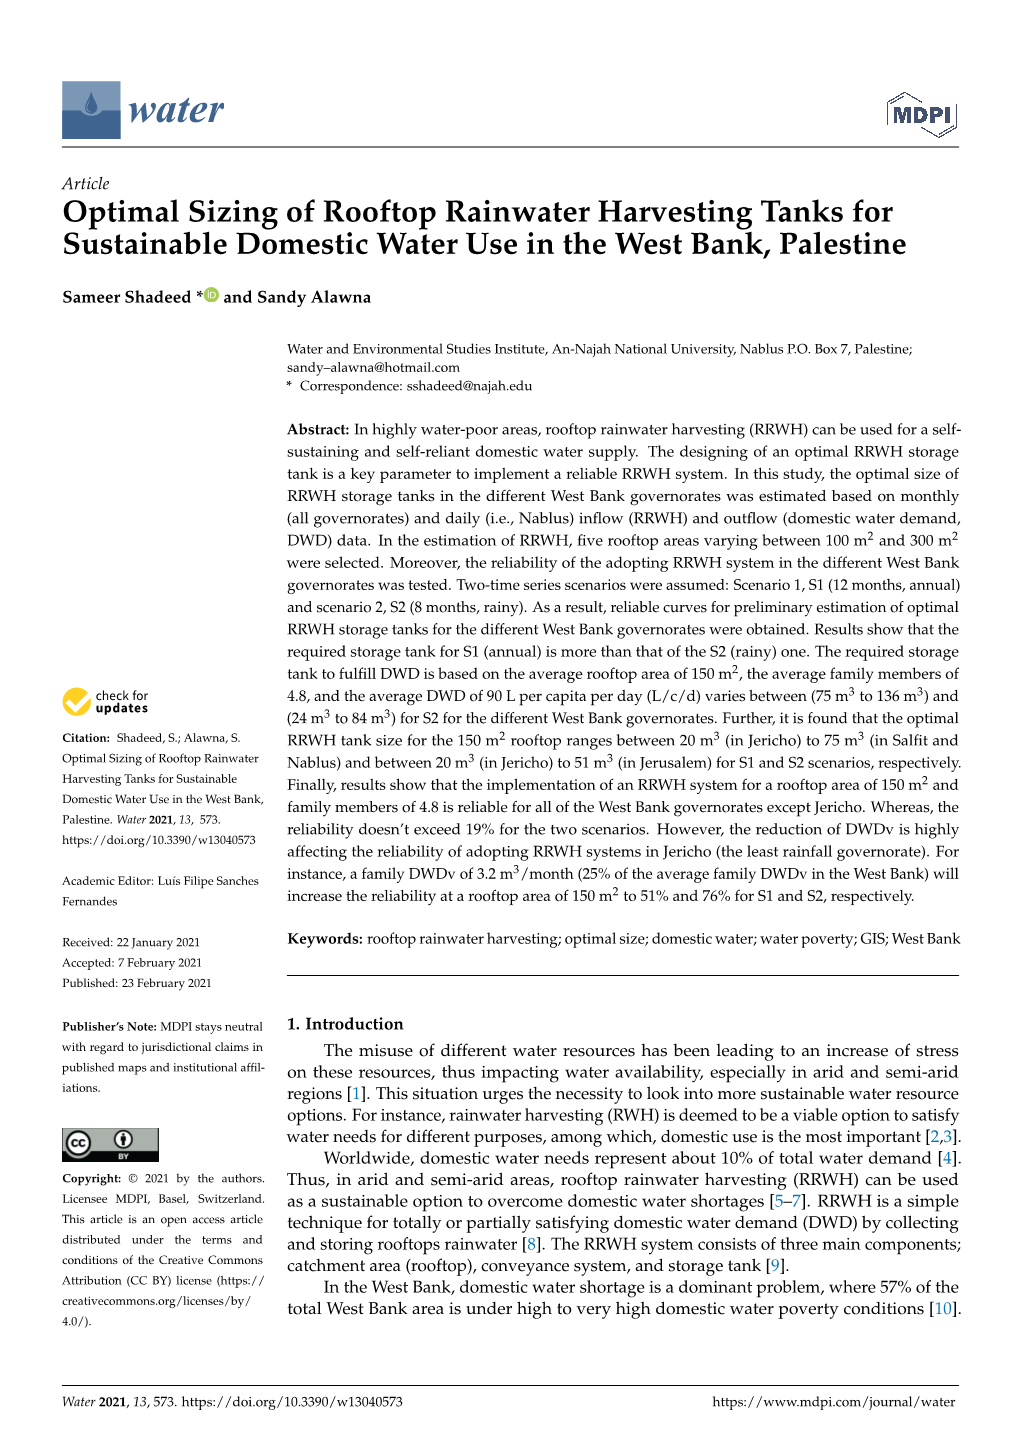 Optimal Sizing of Rooftop Rainwater Harvesting Tanks for Sustainable Domestic Water Use in the West Bank, Palestine